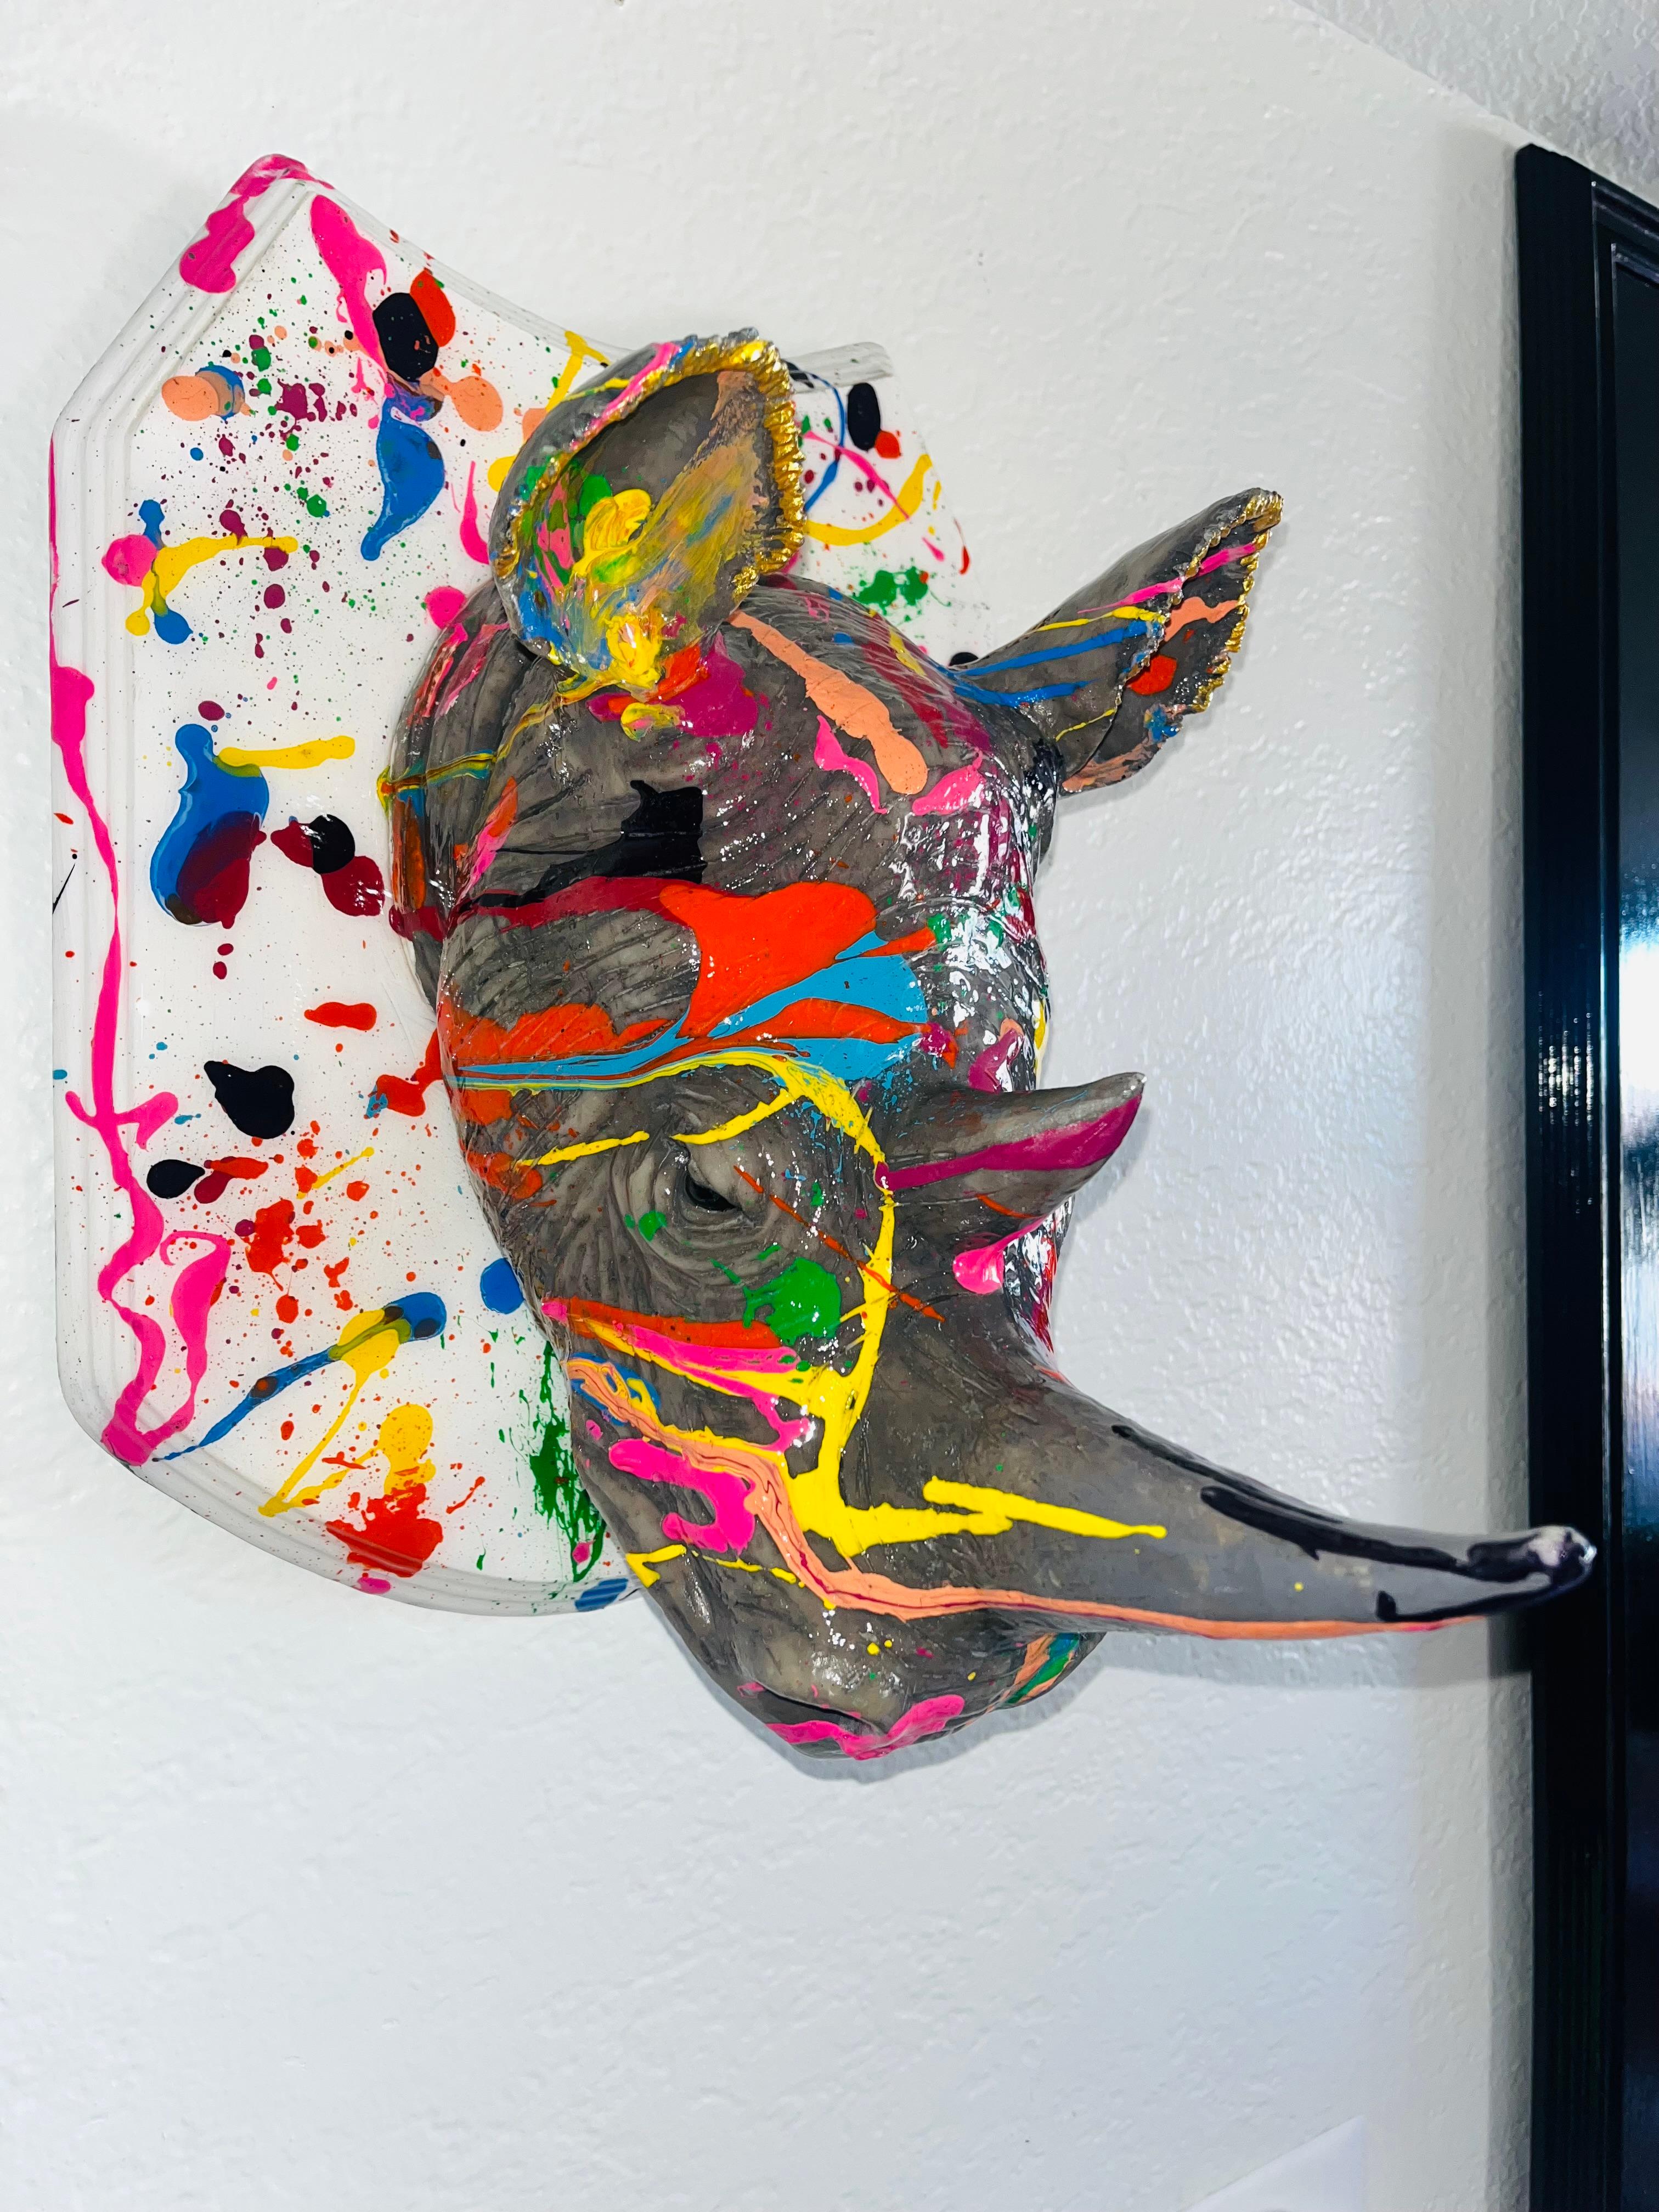                  **ANNUAL SUPER SALE TIL APRIL 25th ONLY**
*This Price Won't Be Repeated Again This Year - Take Advantage Of It*

Pop Focus Rhino is one of a kind wall sculpture.

Rhinos are symbol of focus, discipline and dedication.

Acrylic Paint